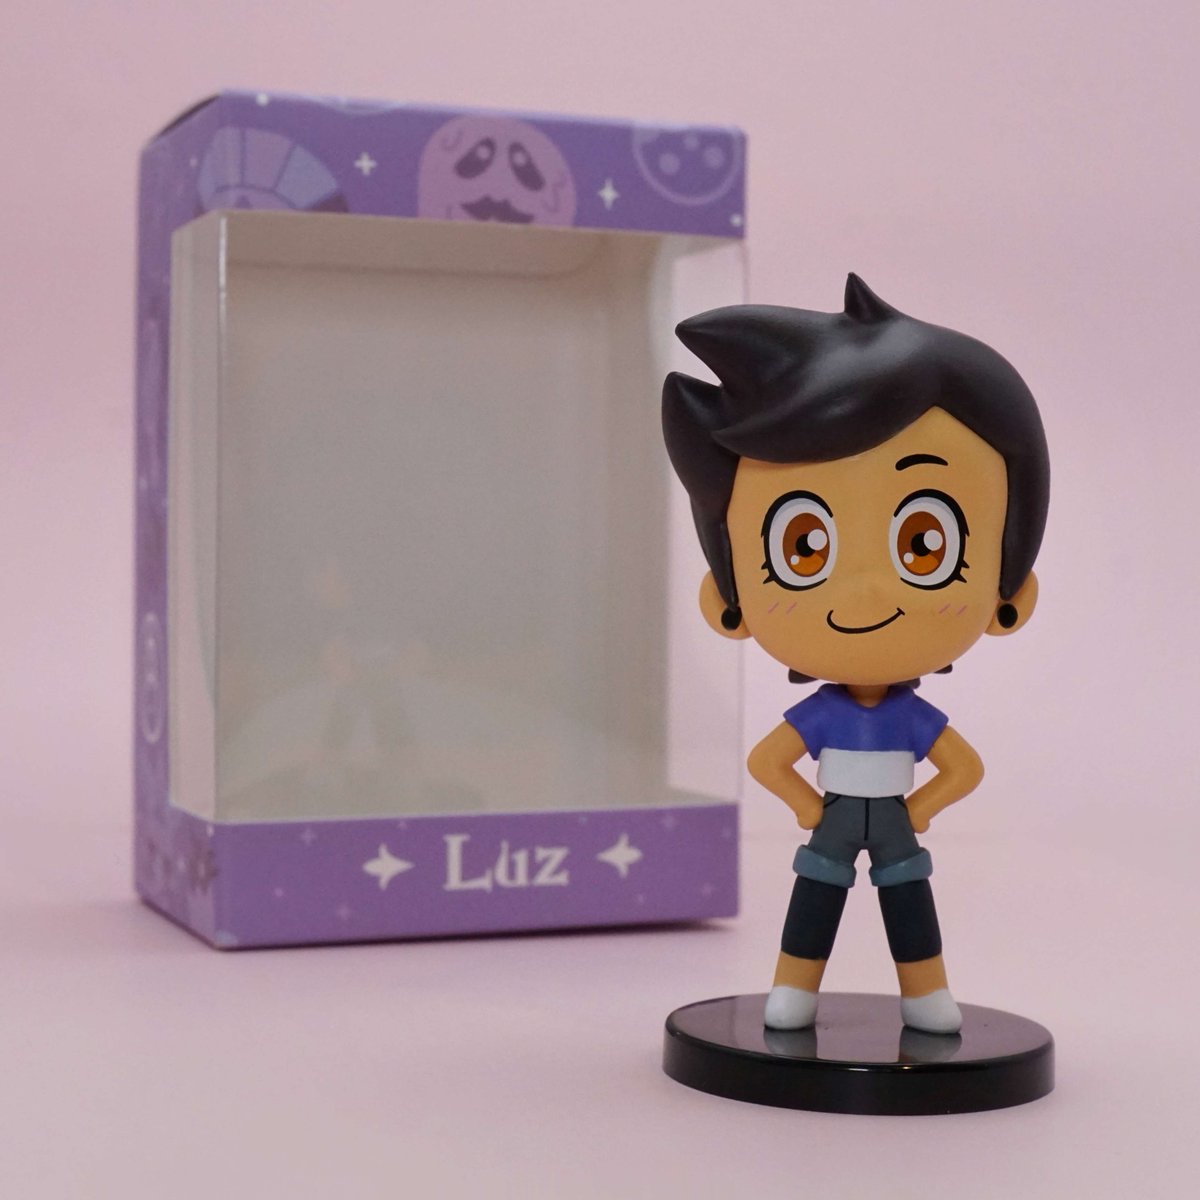 LUZ PRE-ORDERS AVAILABLE NOW!✨With every character either in stock, or up for pre-order, now is your chance to place an order for the entire set of #TheOwlHouse mini figures!💛